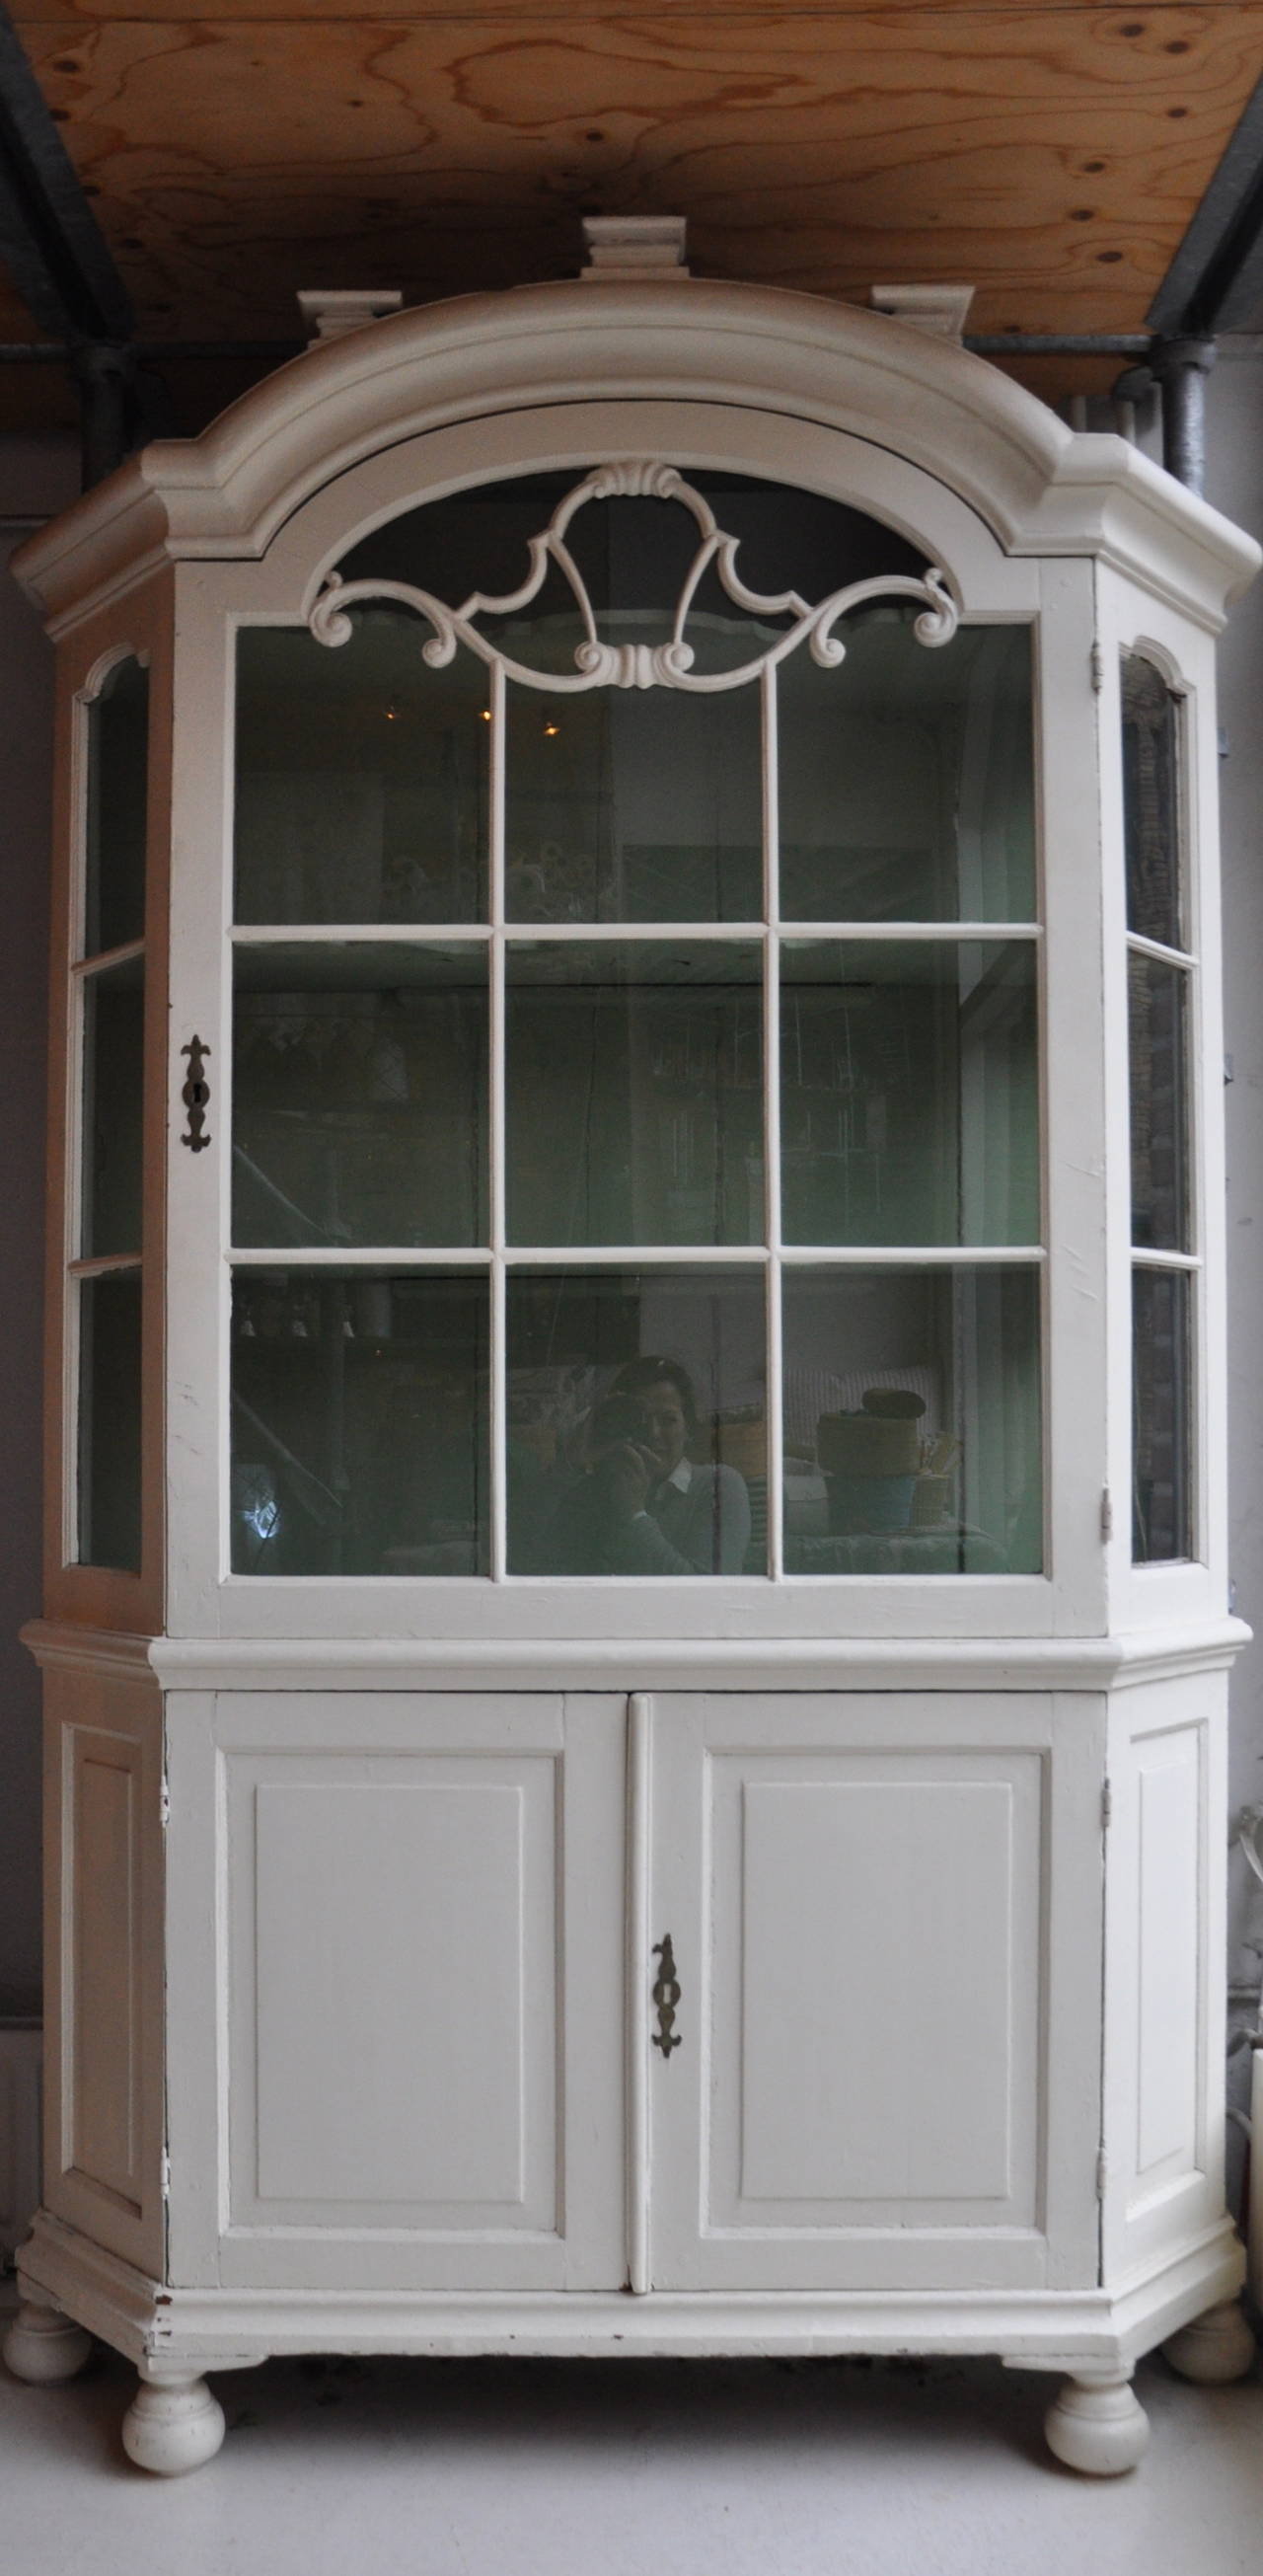 A Dutch display cabinet with a beautifully carved glass door.
The color of the paint inside is the original lime green color.
A cabinet with a very similar door was made circa 1740 and described in an important book about antique Dutch furniture